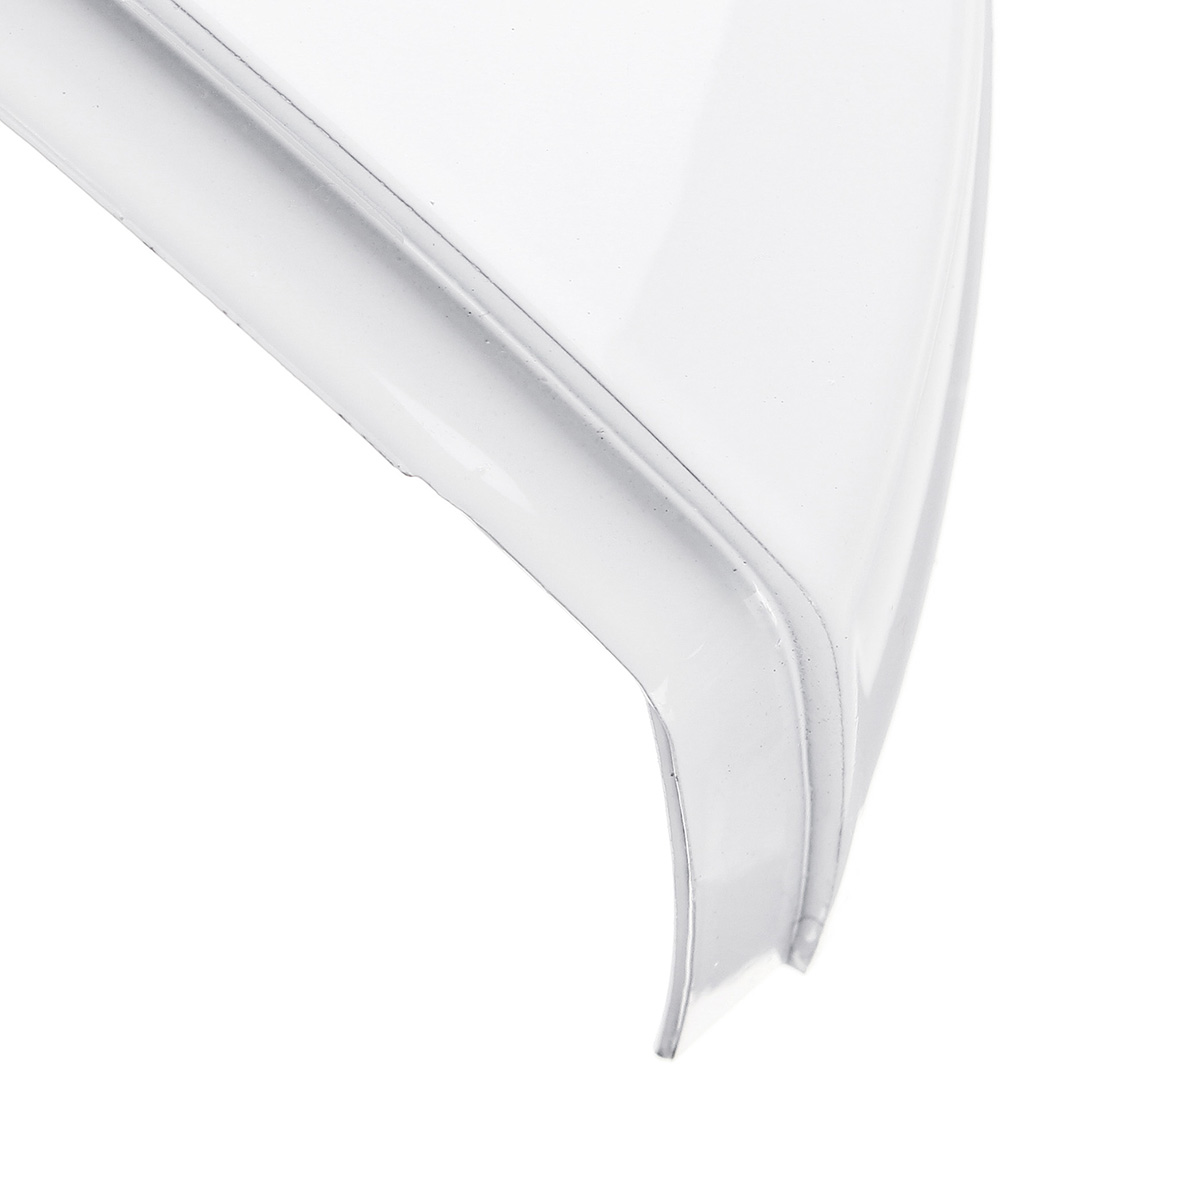 Door-Wing-Mirror-Cover-Painted-White-Left-For-VW-Polo-2009-2017-1724885